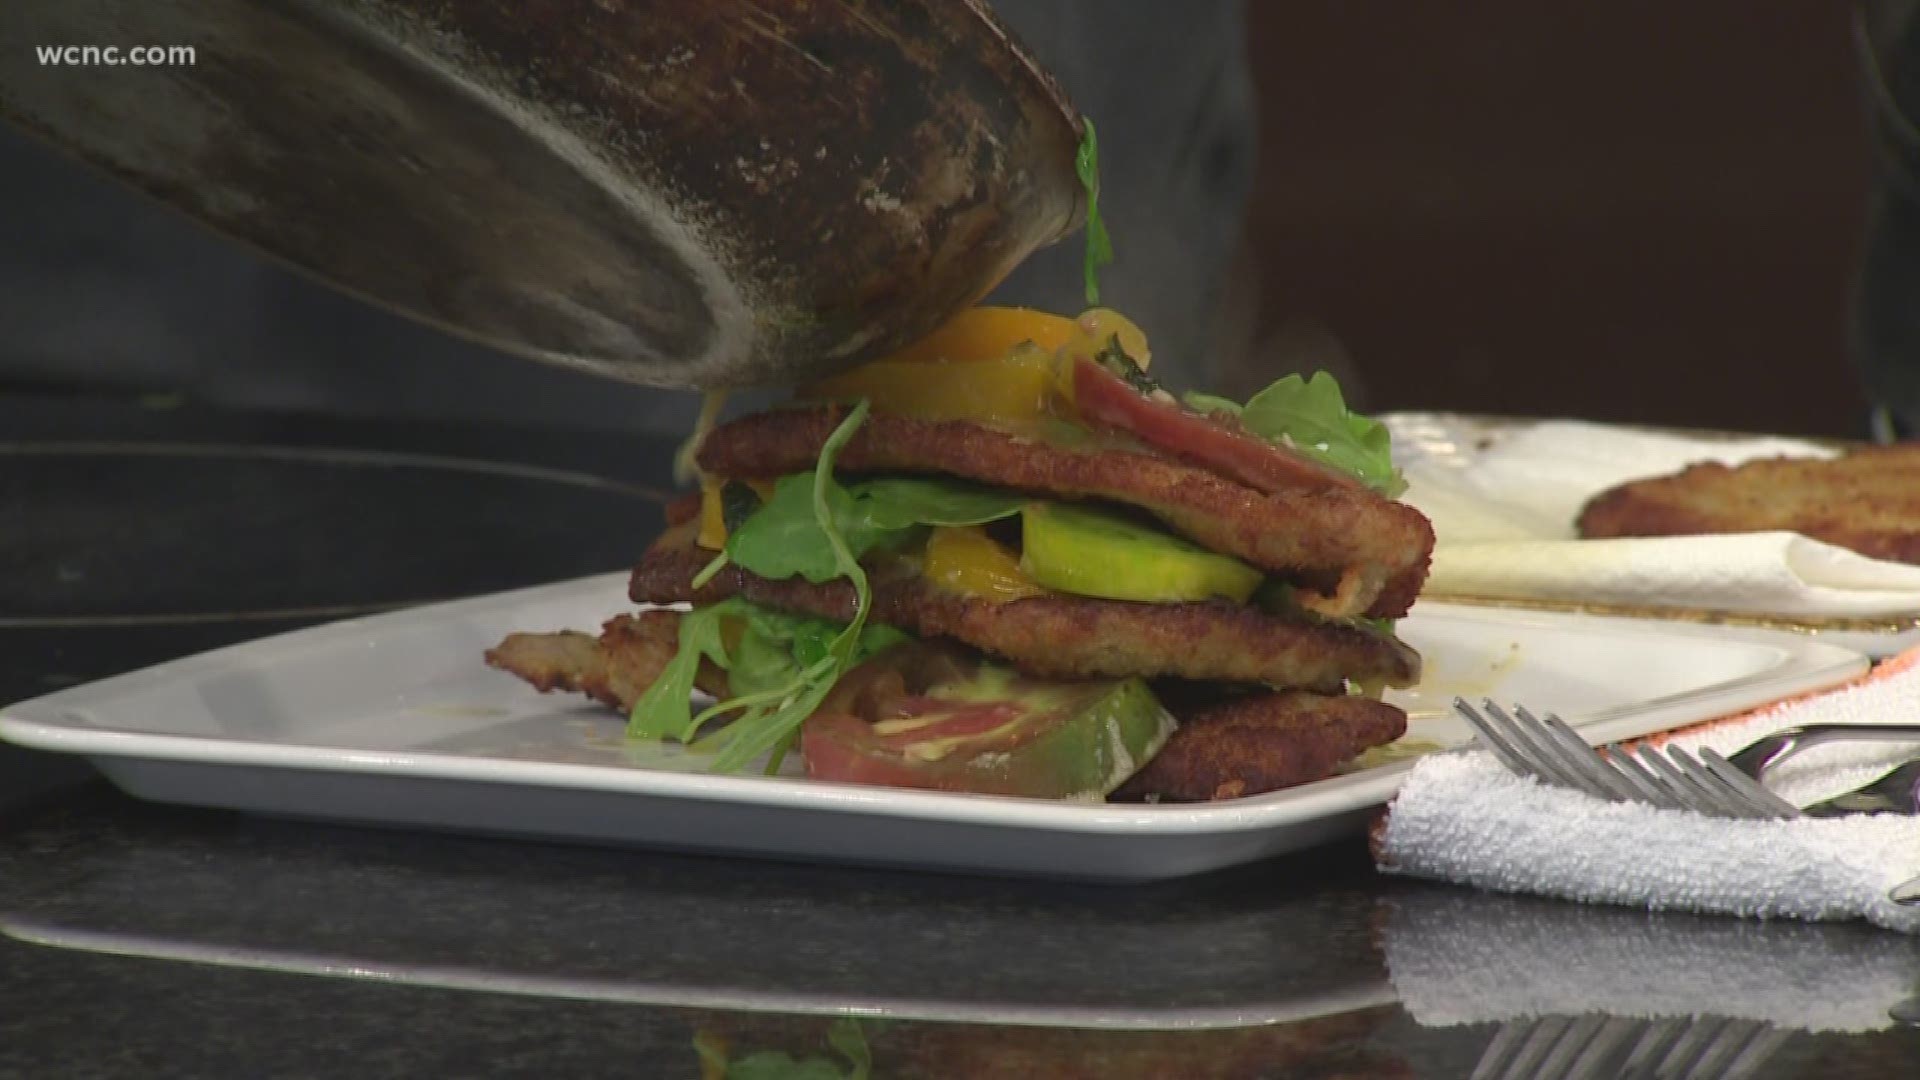 Executive chef of Legion Brewing, Gene Briggs, shows us how to make pork Milanese with pomegranate and arugula.